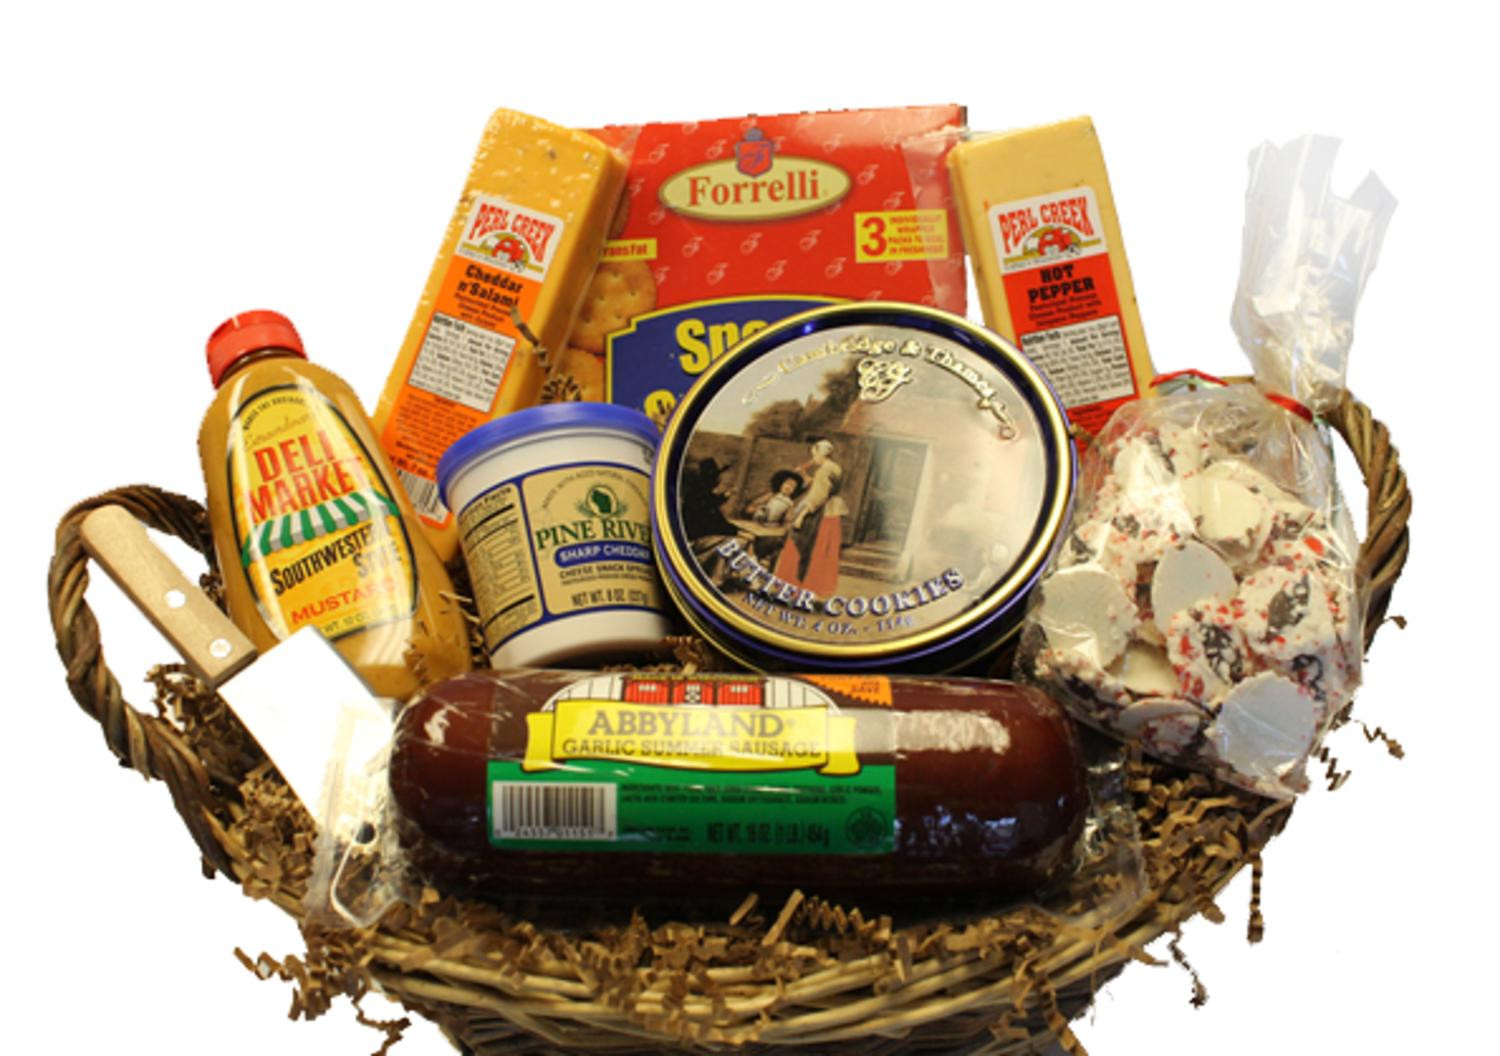 Summer Sausage And Cheese Gift Baskets
 10 Piece Picnic Party Gourmet Summer Sausage and Cheese